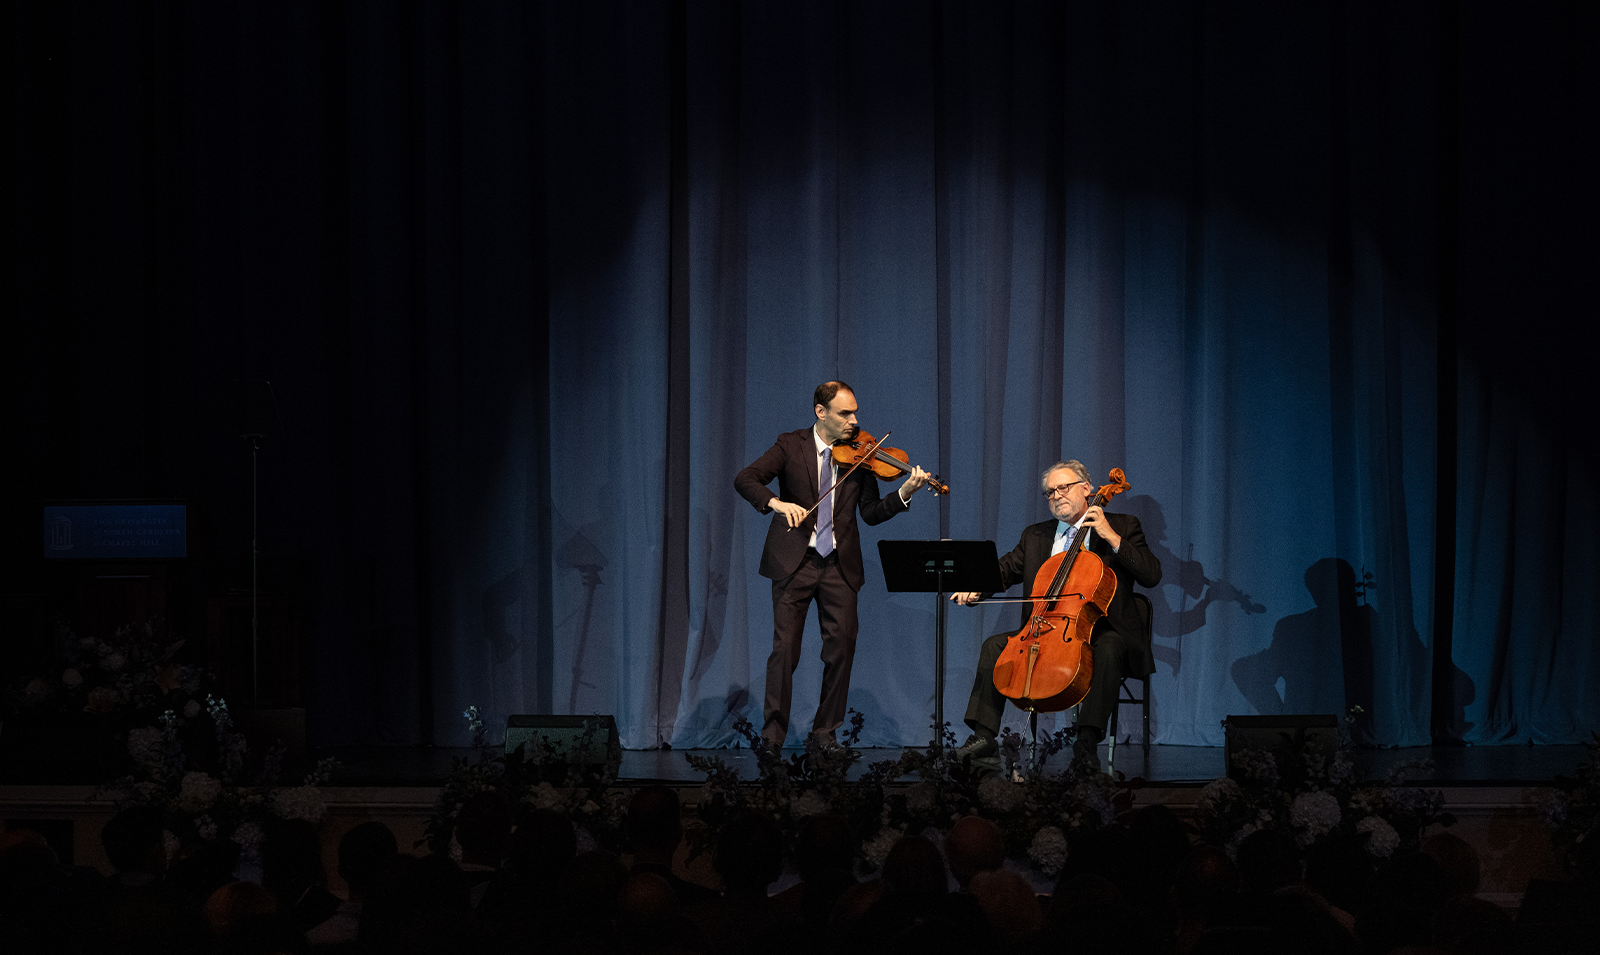 Two men playing the cello and violin on stage.